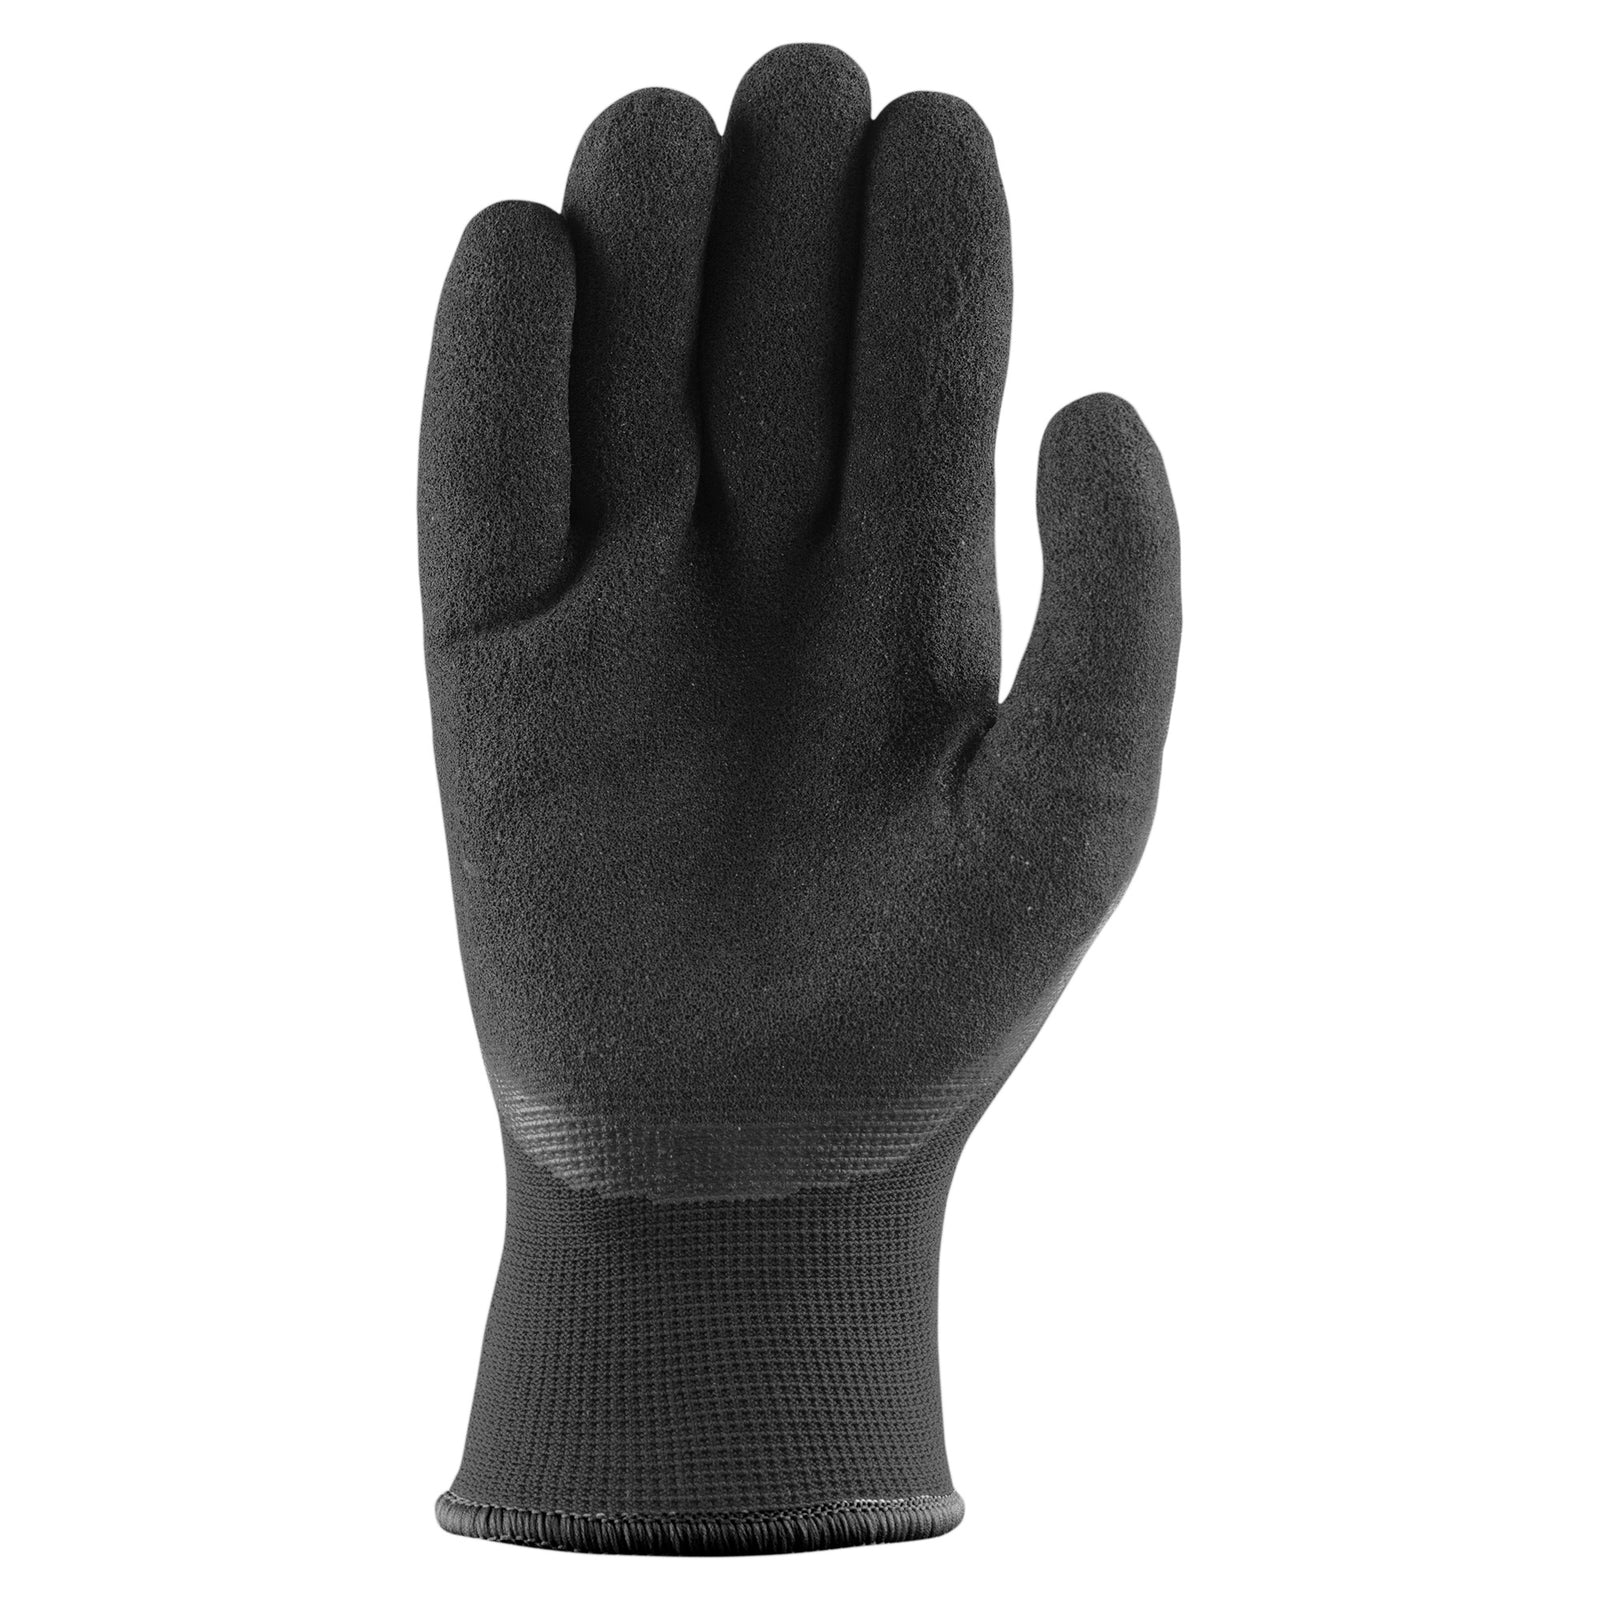 Evridwear Pairs Winter Freezer Work Gloves, Latex Coated, 52% OFF